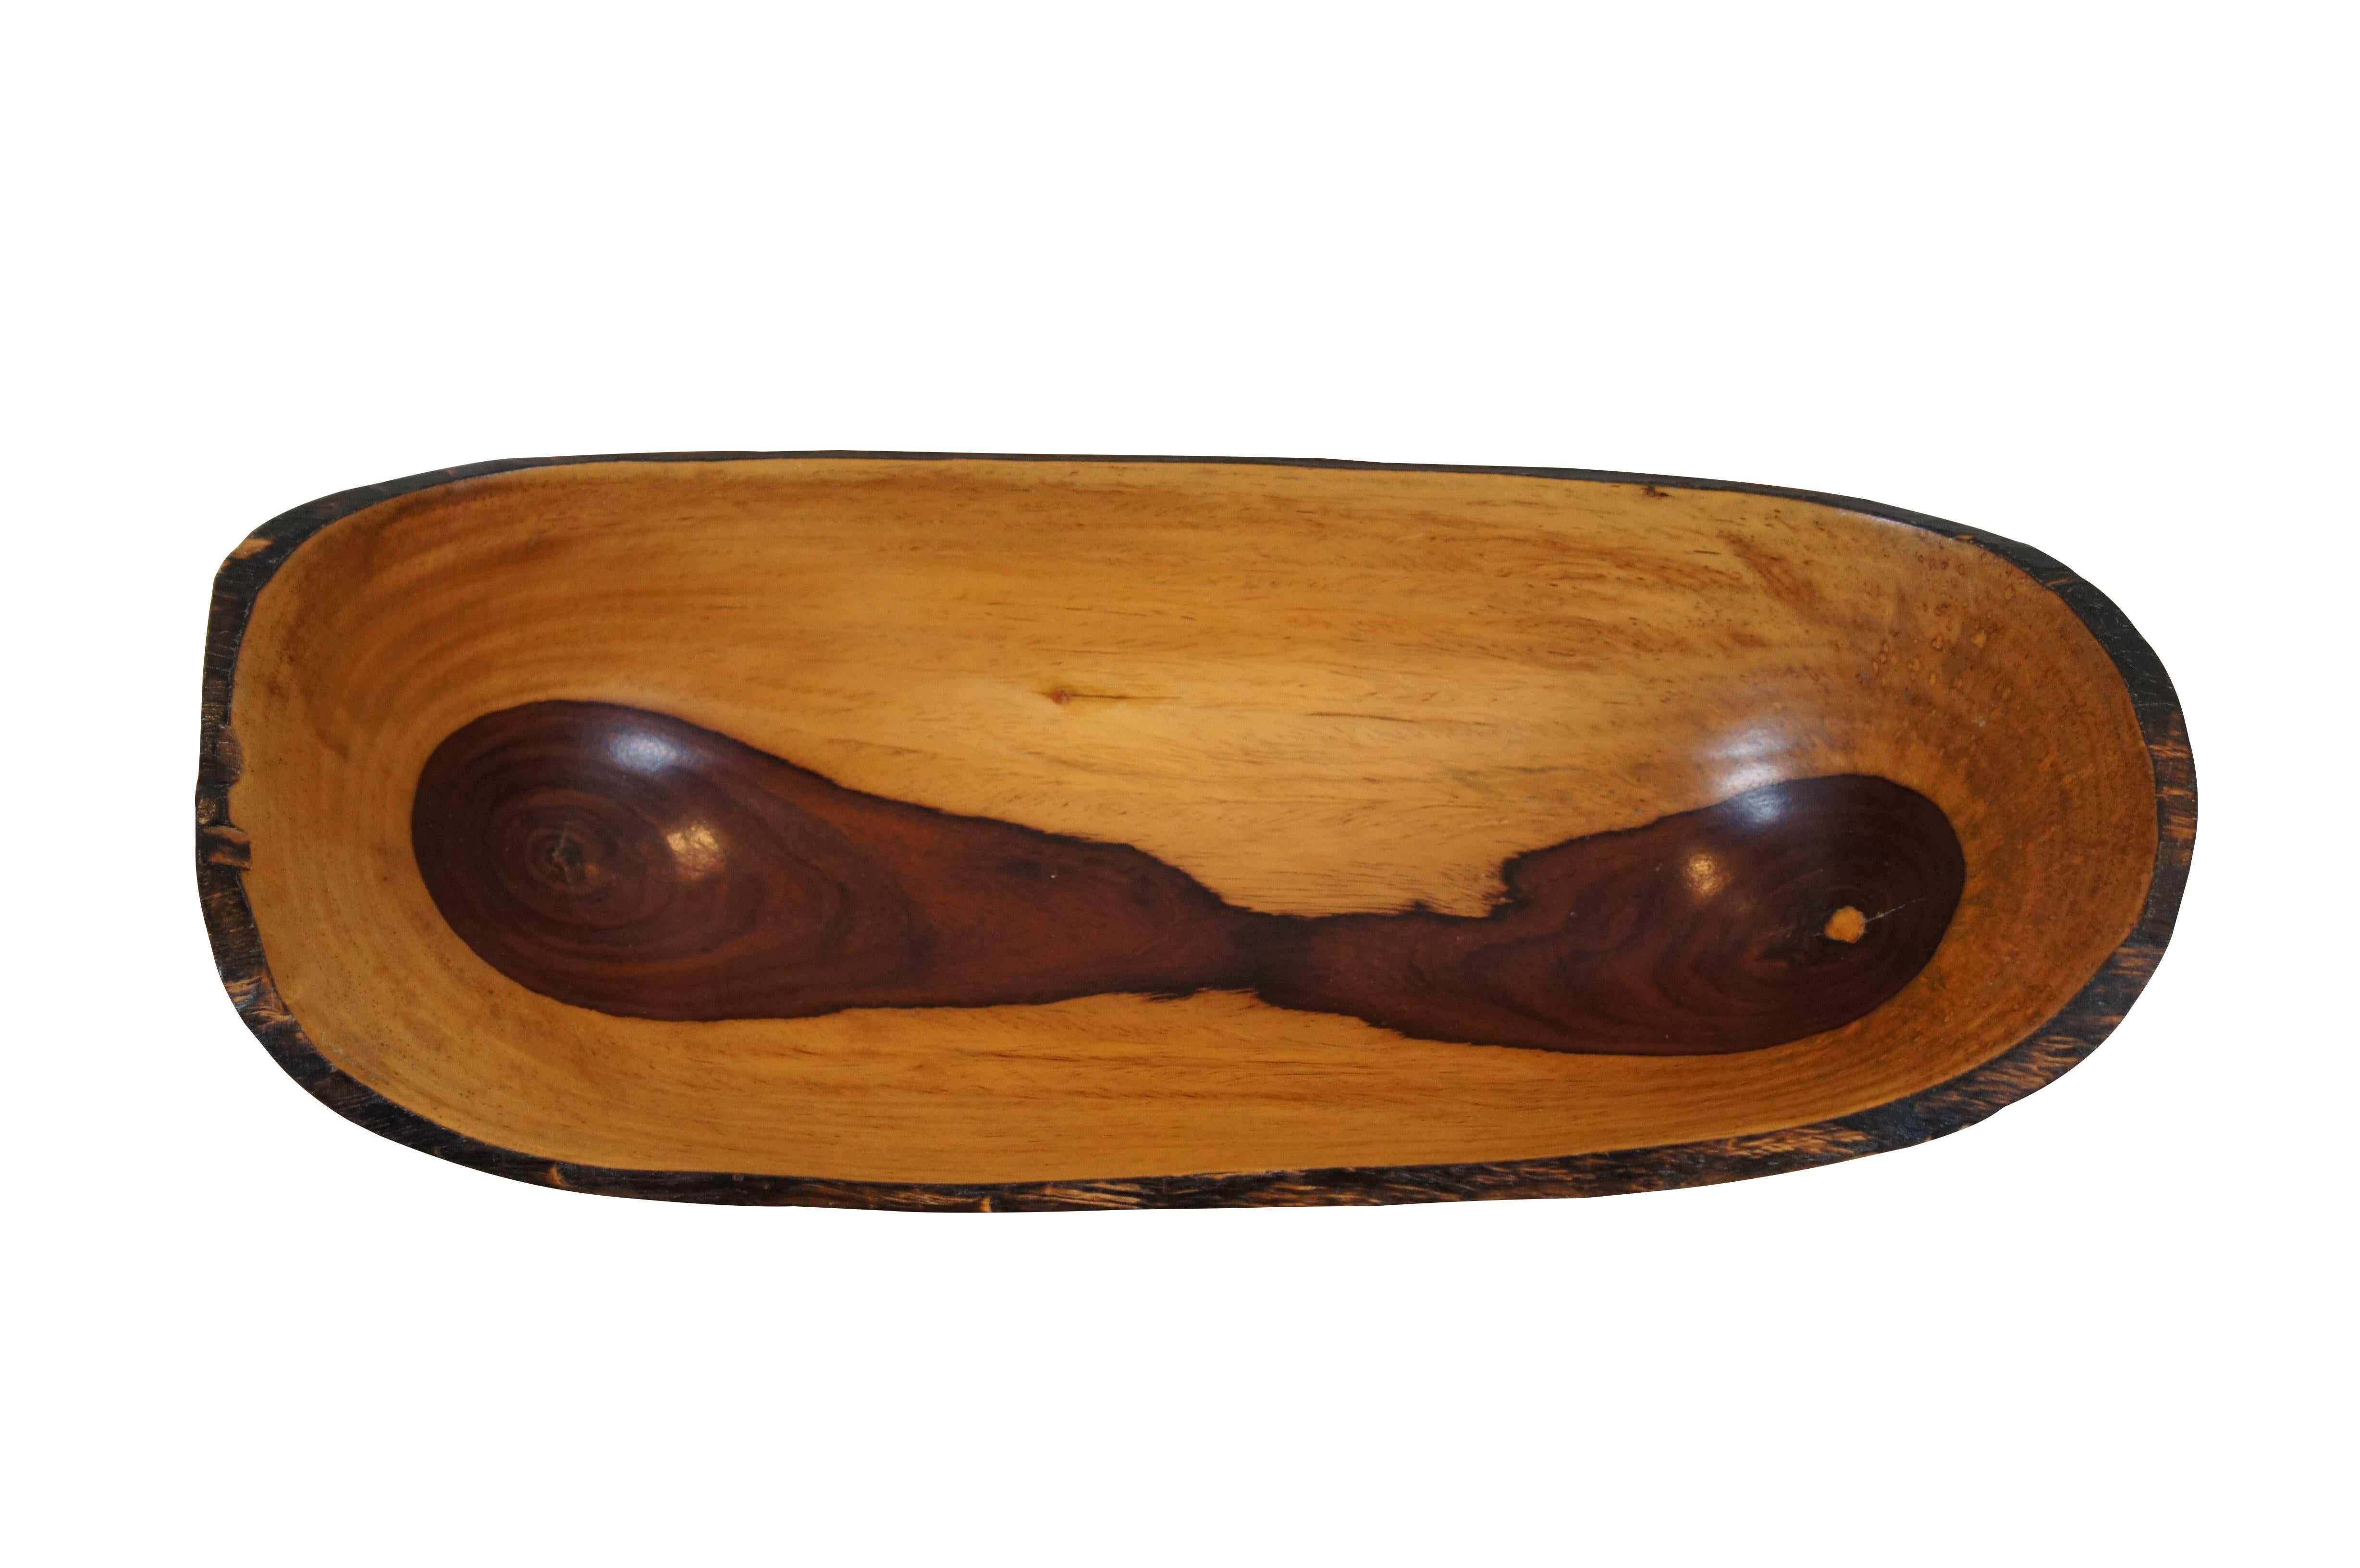 Vintage artisan carved fruit / bread / centerpiece serving bowl.  Made of olivewood featuring oval form with live edge and natural tones.

Dimensions:
16.5” x 7.25” x 5” (Width x Depth x Height)